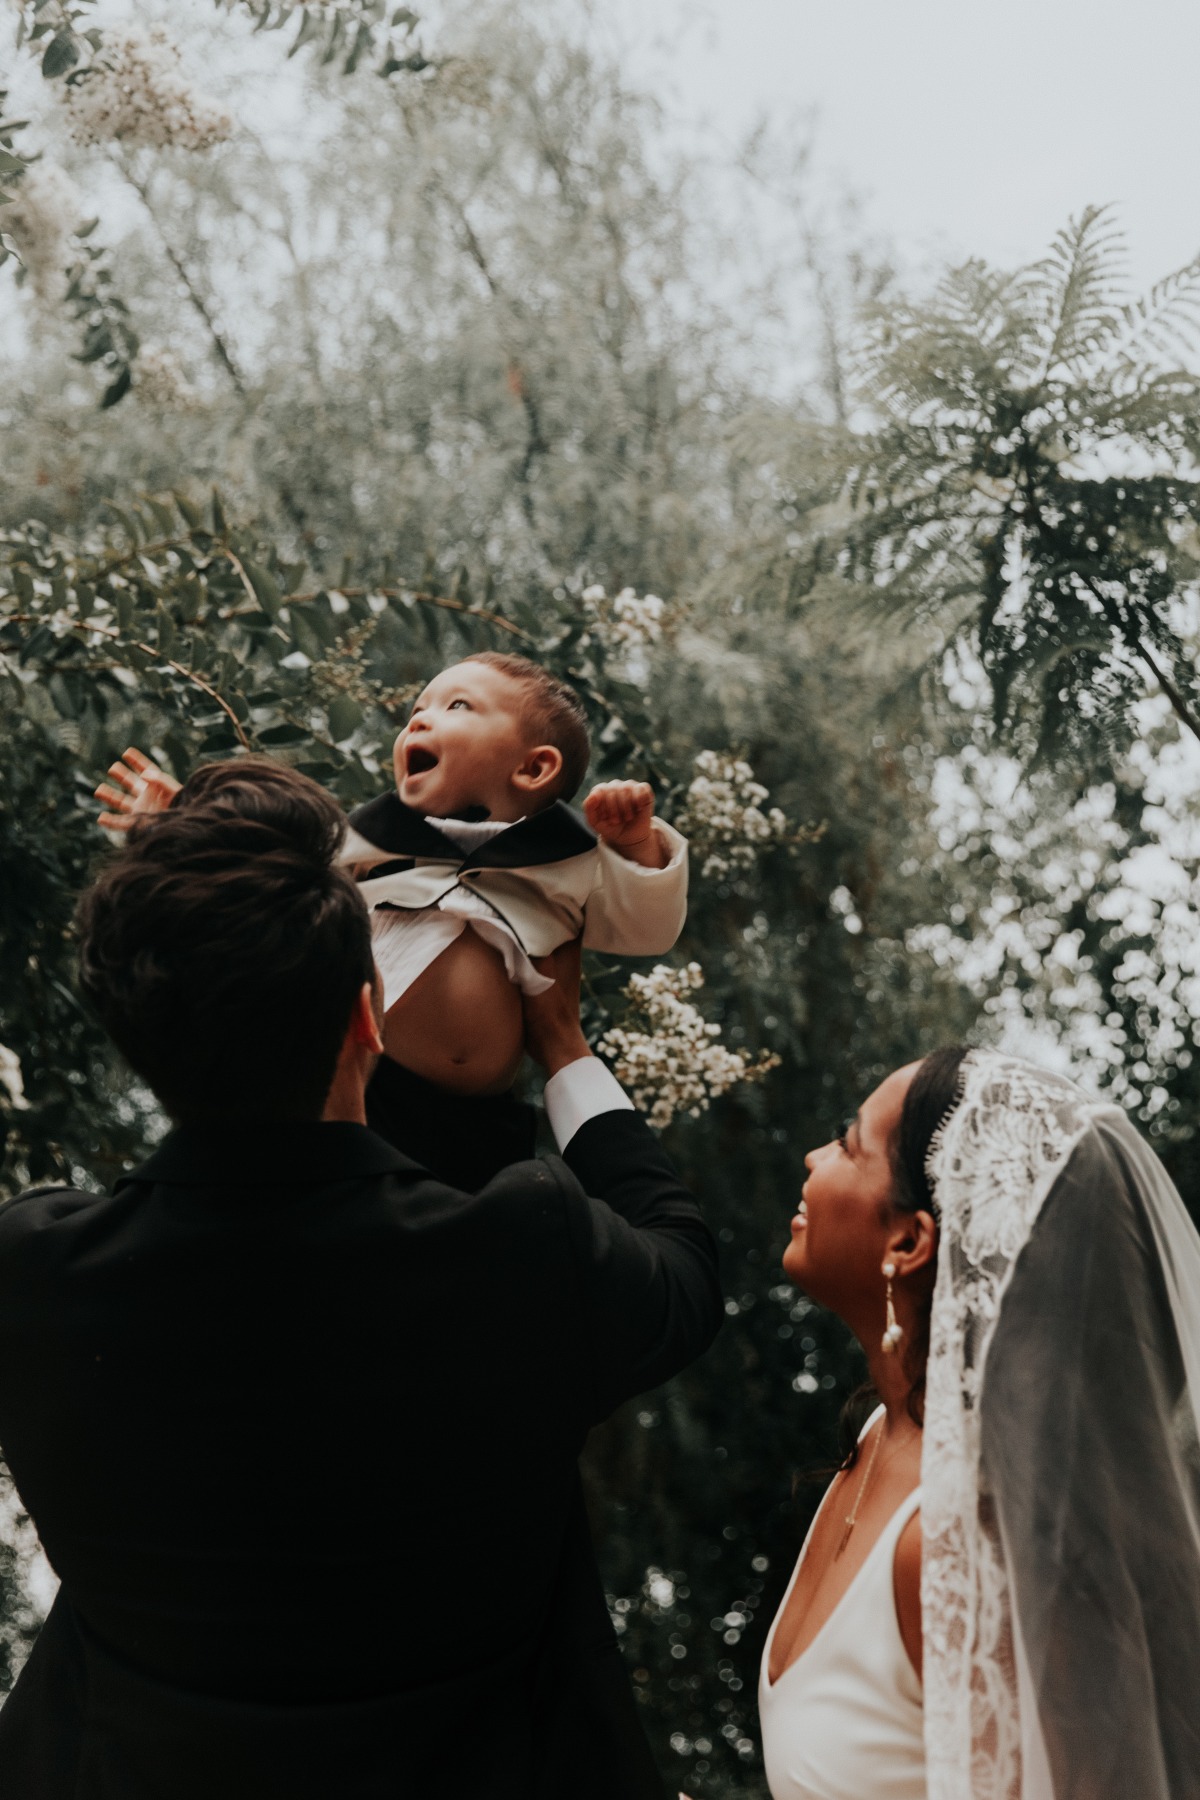 incorporating your child into the wedding ceremony